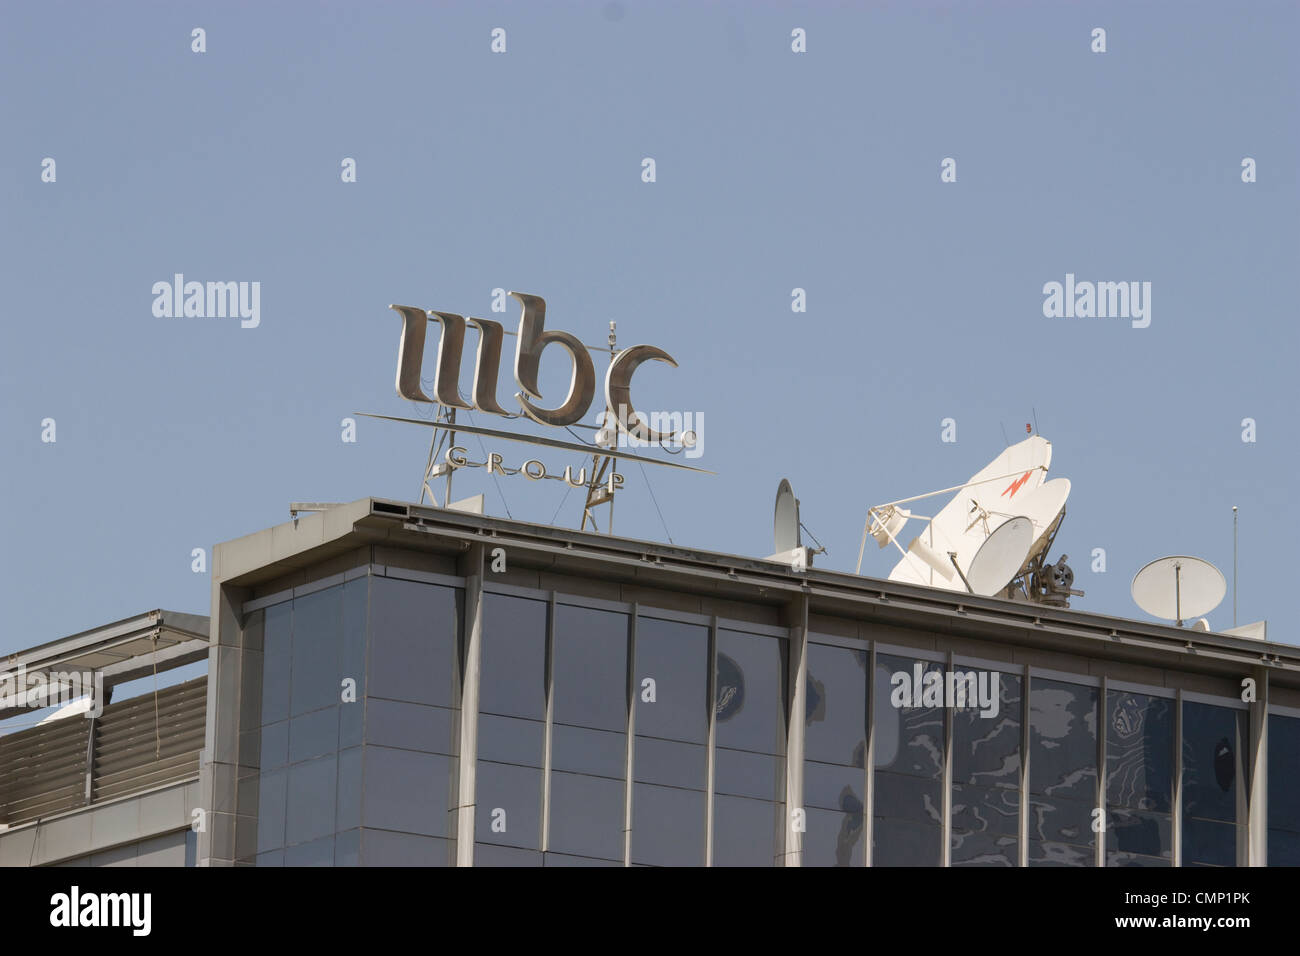 Mbc group hi-res stock photography and images - Alamy